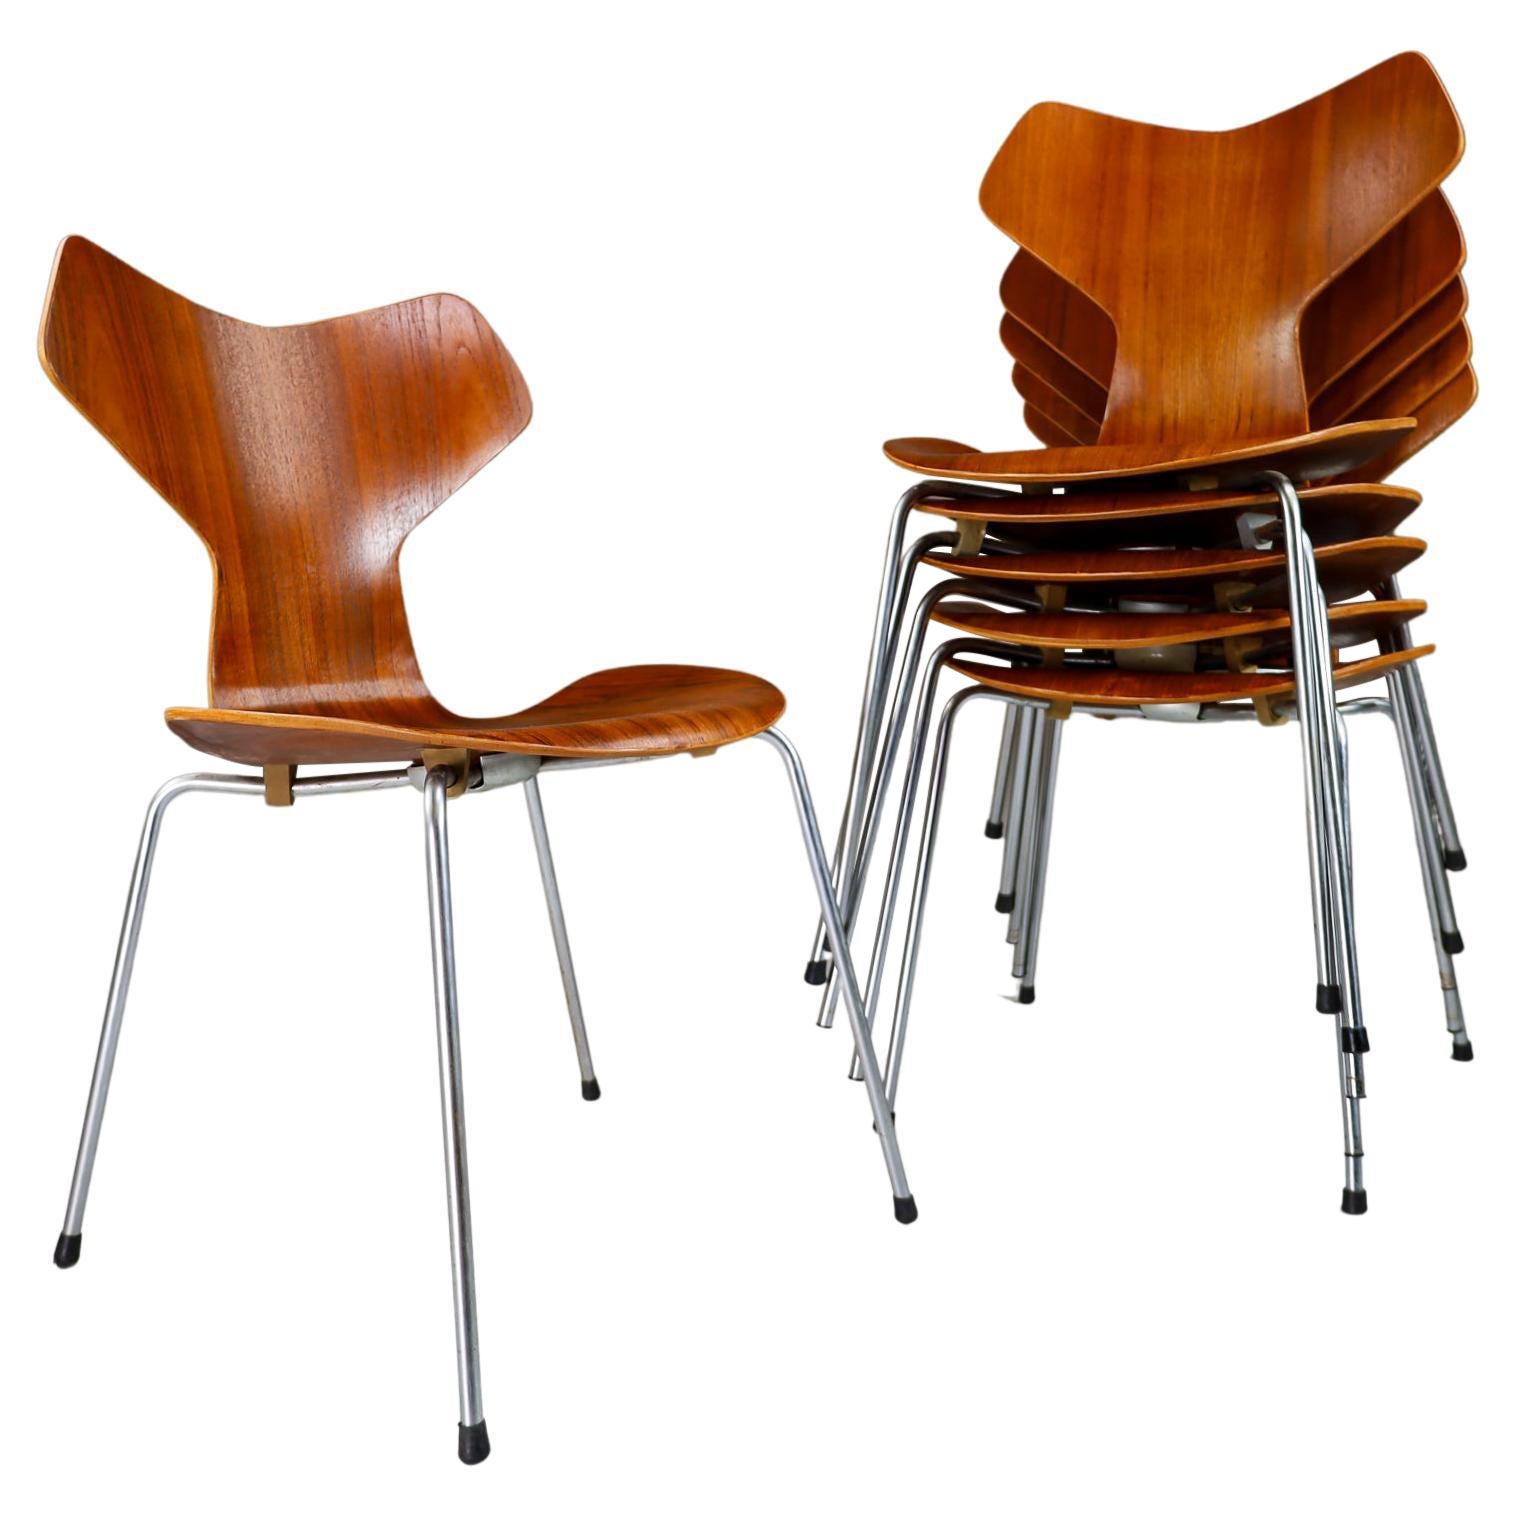 Asko 'Prepop' Dining Chairs by Arne Jacobsen at 1stDibs